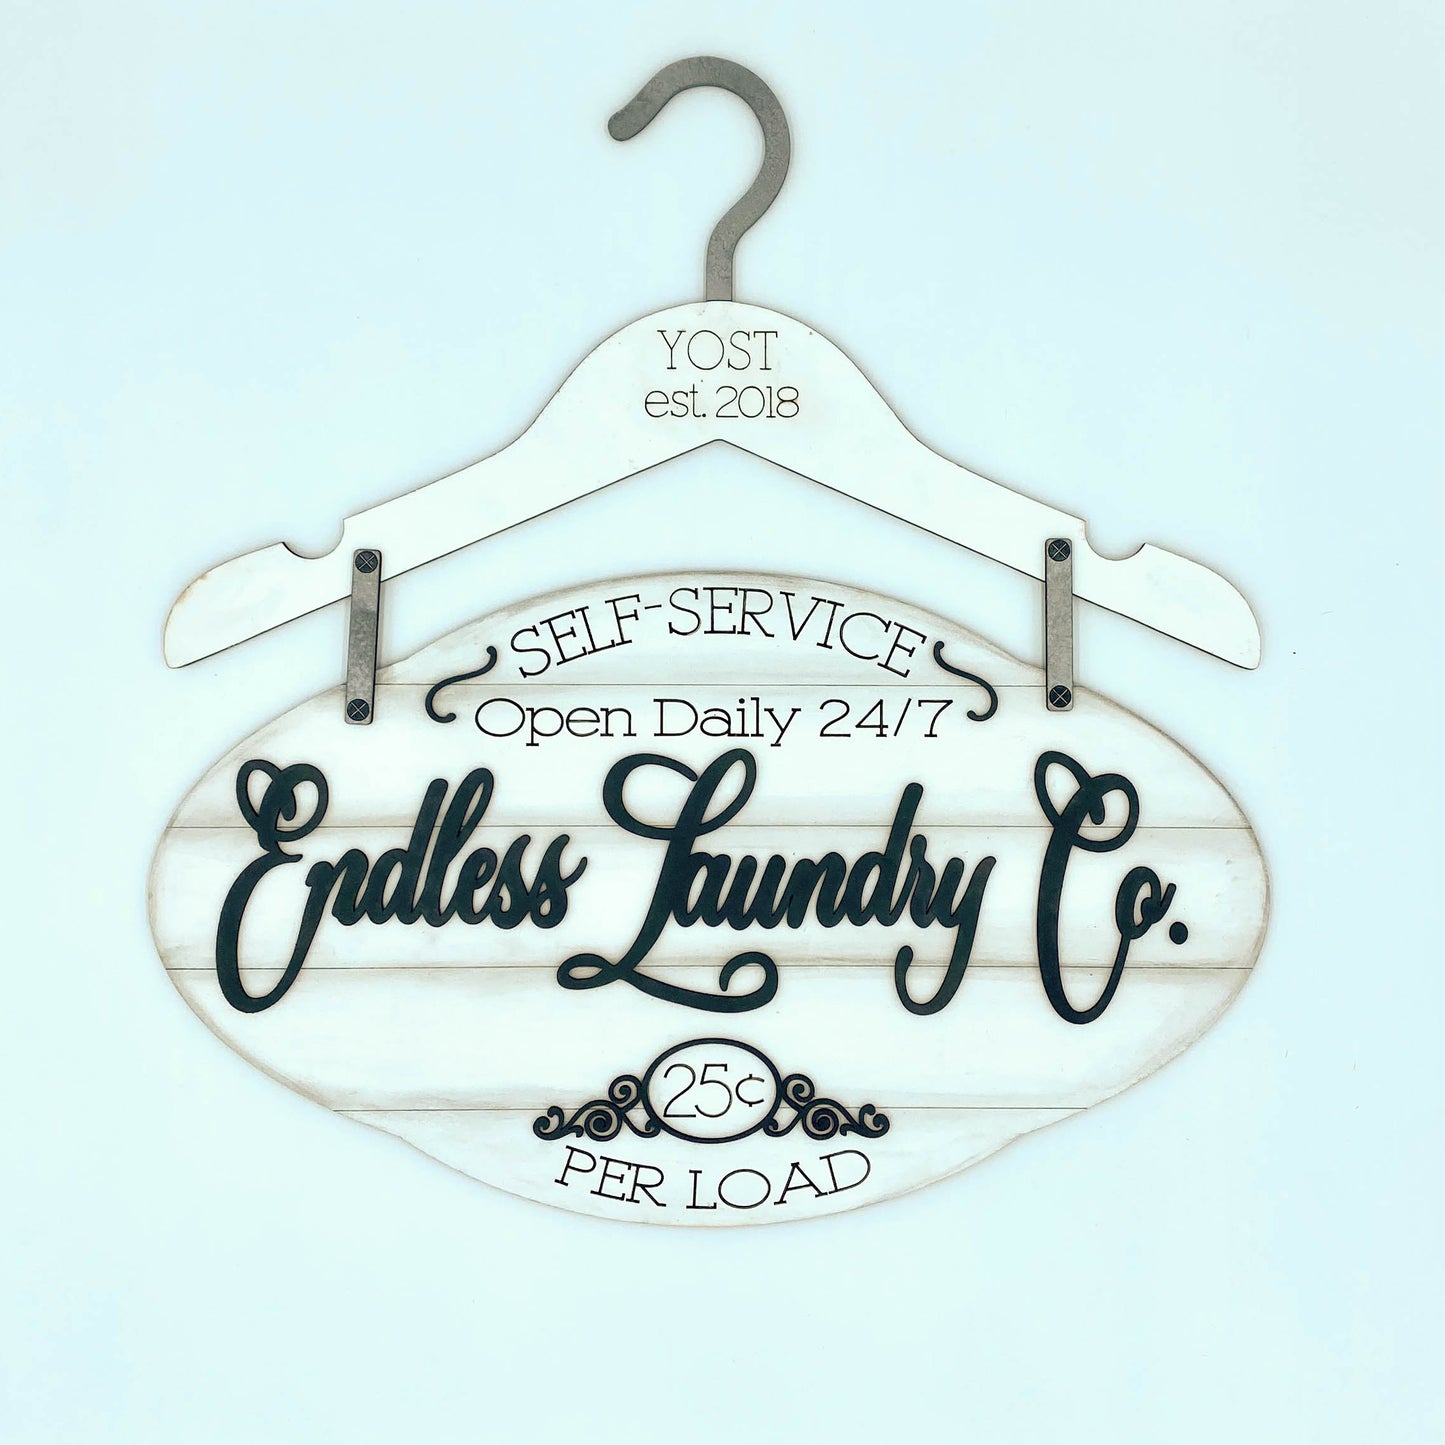 Endless Laundry Co. Sign